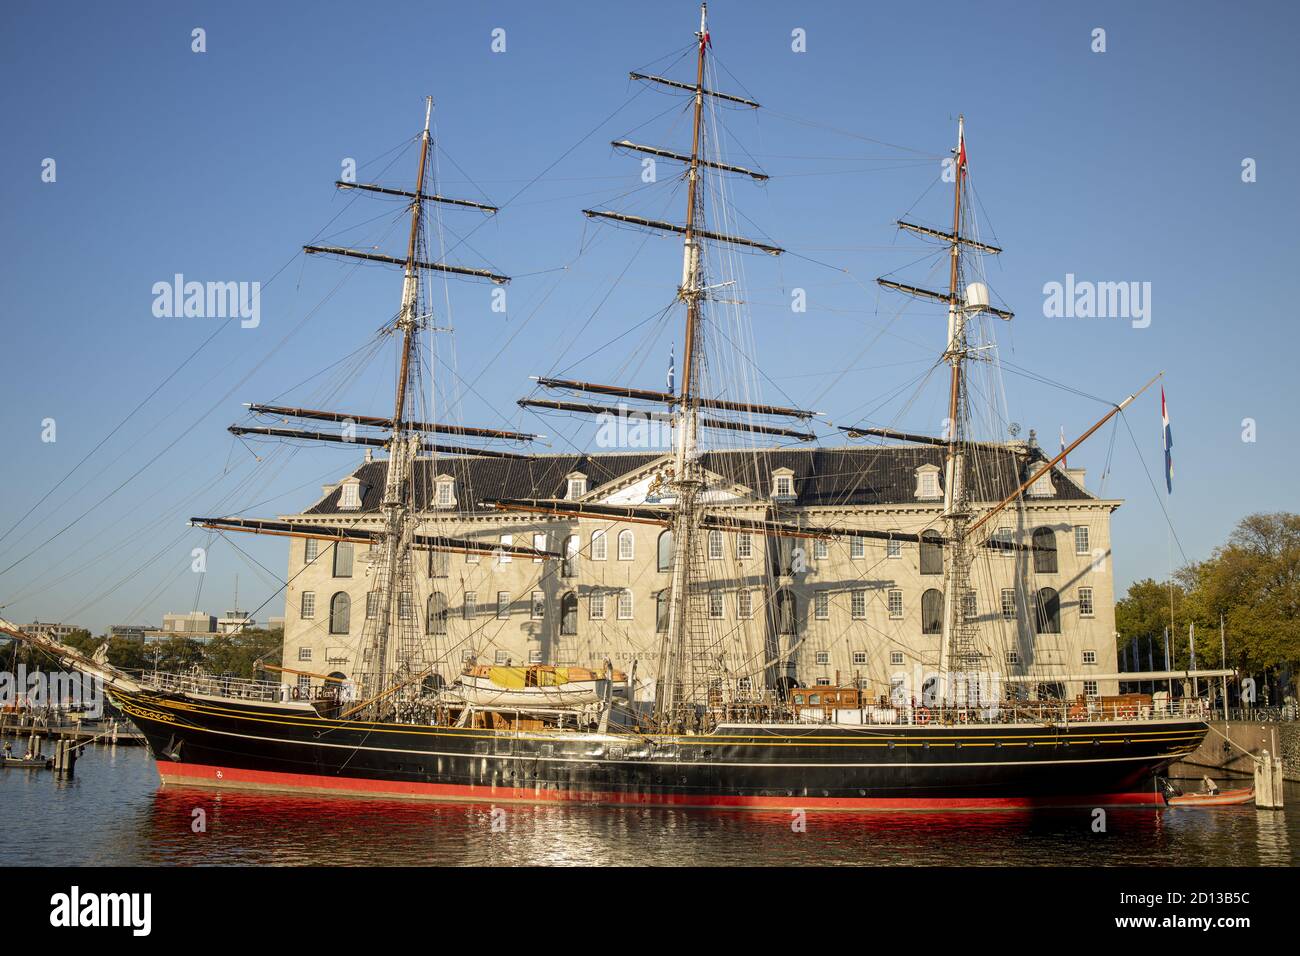 AMSTERDAM, NETHERLANDS - Sep 22, 2020: Closeup of historic seafarer sail ship in front of open air maritime Scheepvaart museum against a clear blue sk Stock Photo